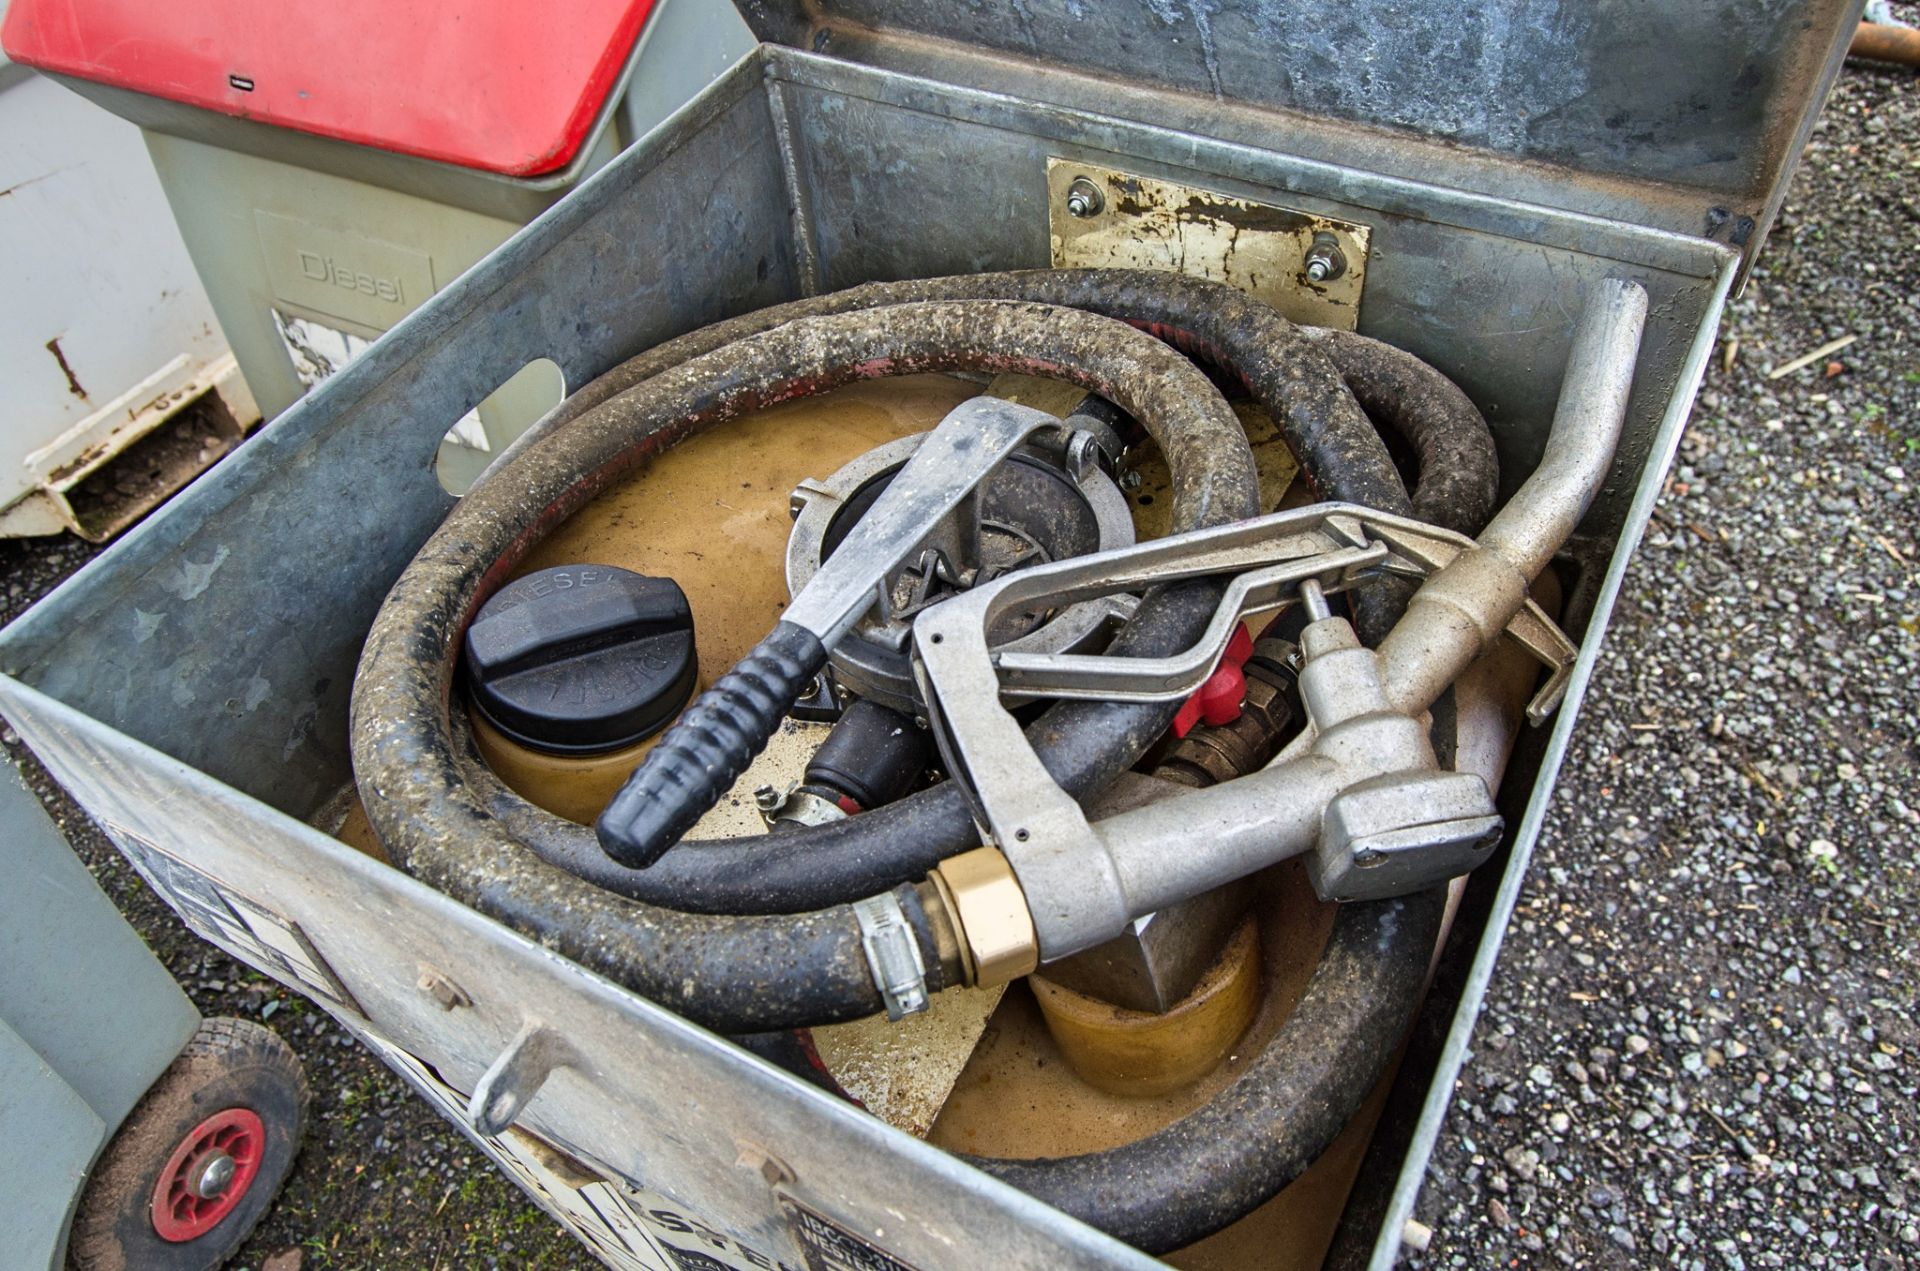 Western Easy Cube 105 litre bunded fuel bowser c/w manual pump, delivery hose & nozzle 19035149 - Image 2 of 2